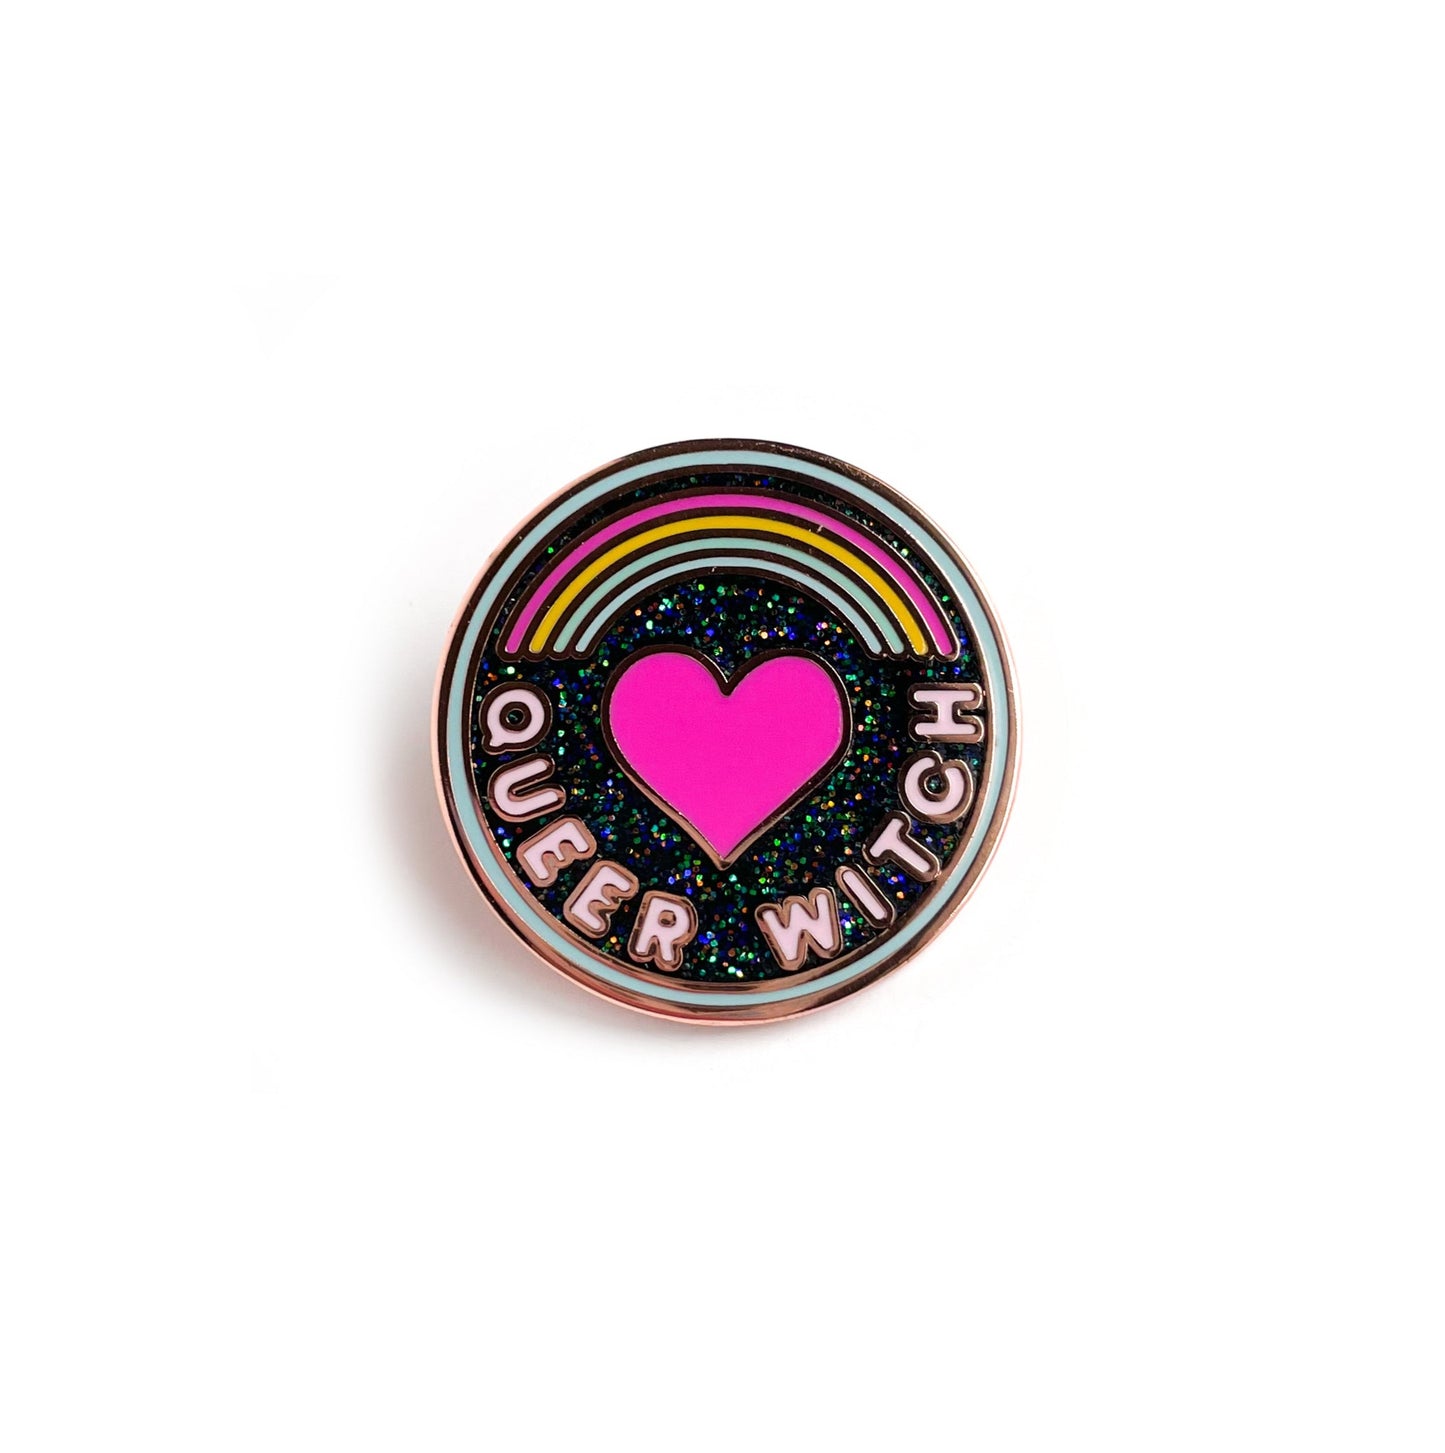 A circular enamel pin with a light blue border, black glitter background and words that read "Queer Witch". It has a rainbow and a heart on it.